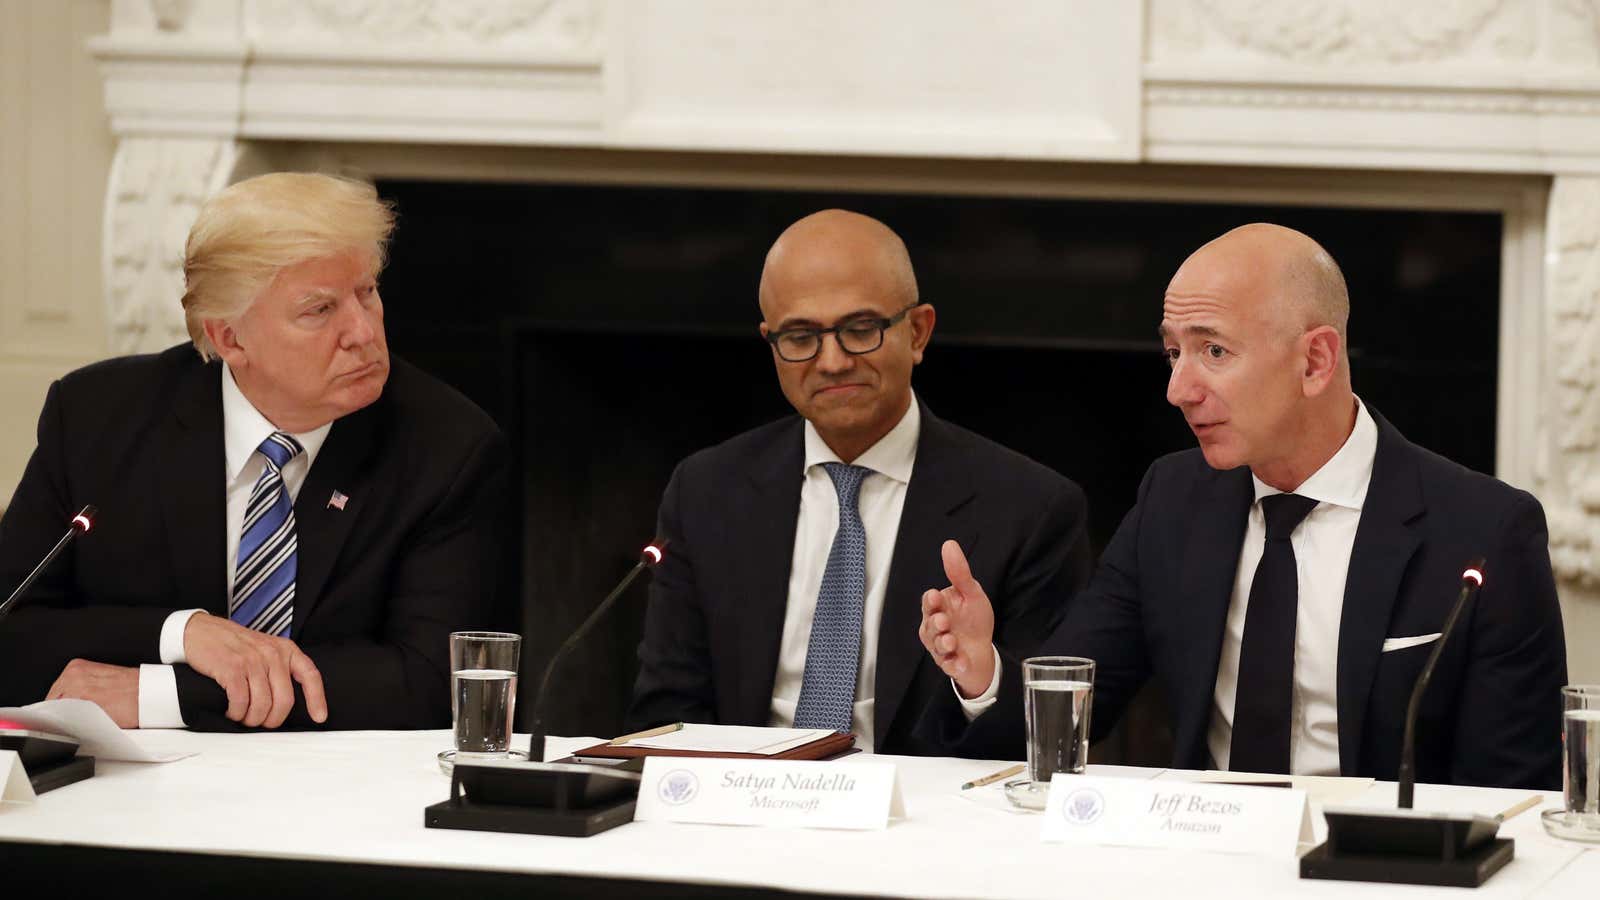 Donald Trump, left, is sparring with Jeff Bezos, right, yet again.